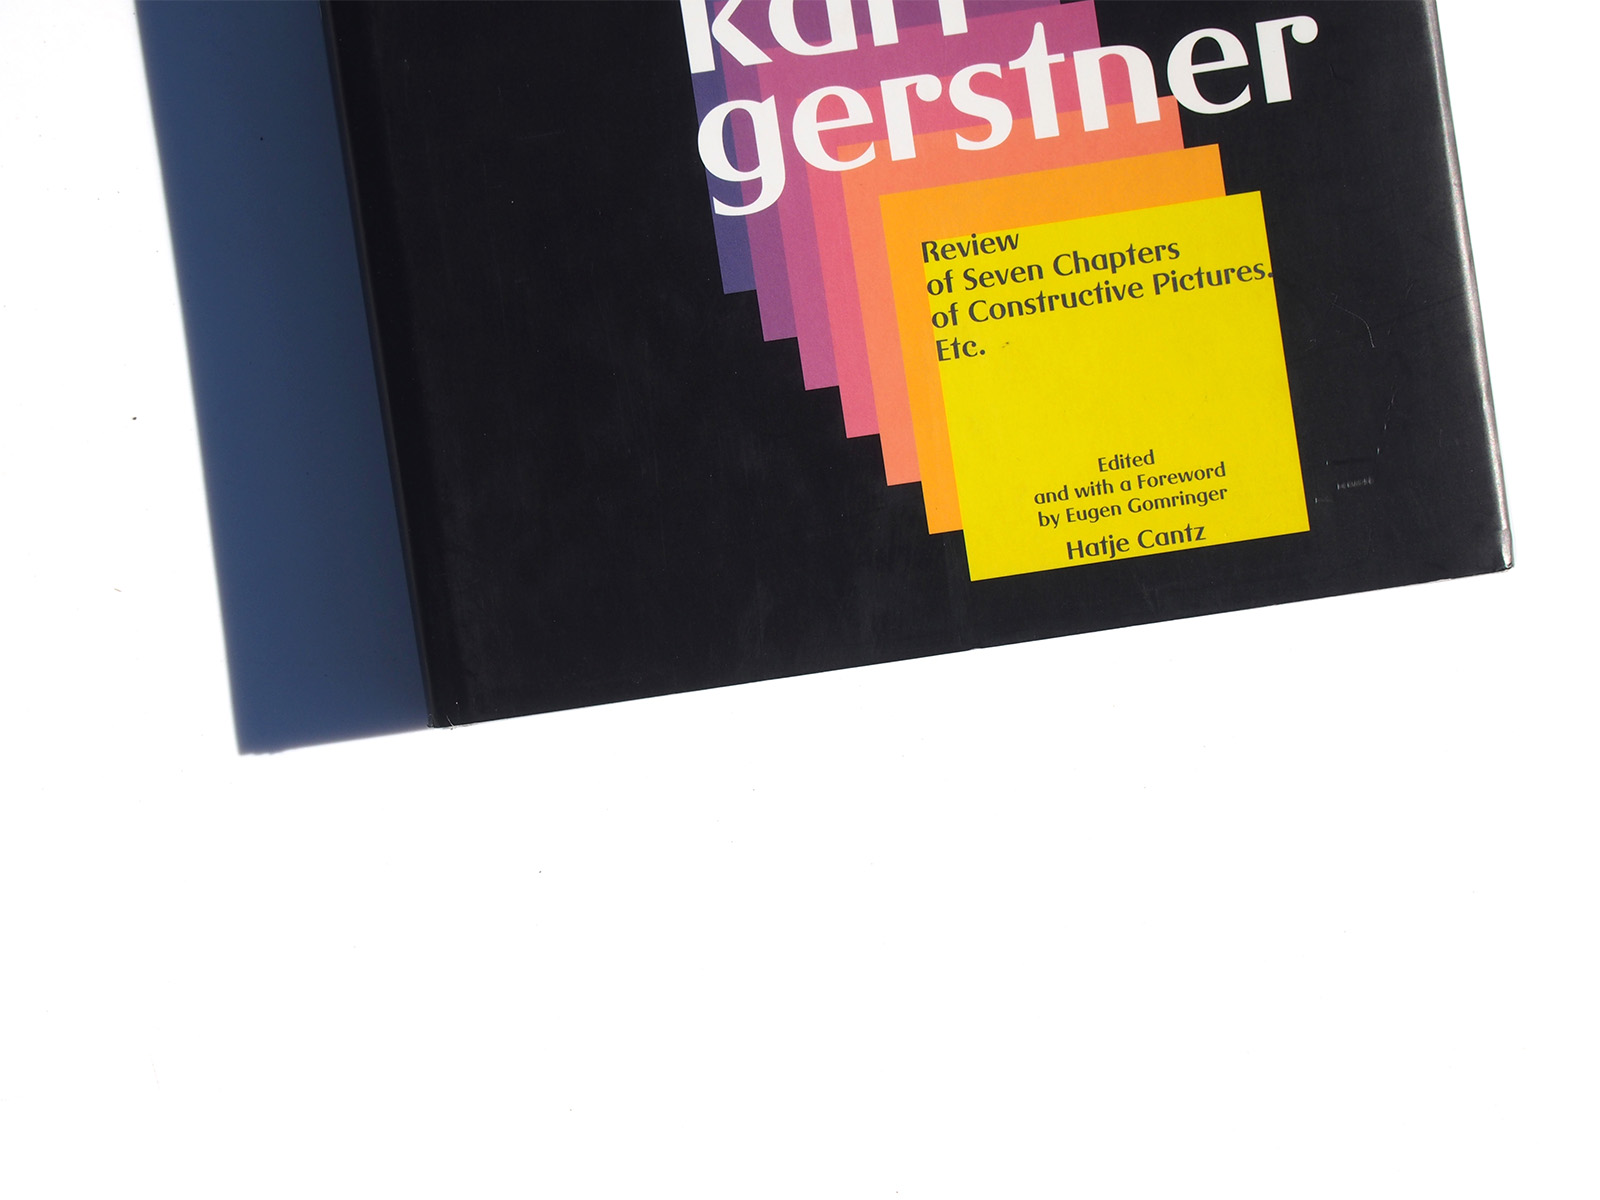 Karl Gerstner: Review of Seven Chapters of Constructive Pictures